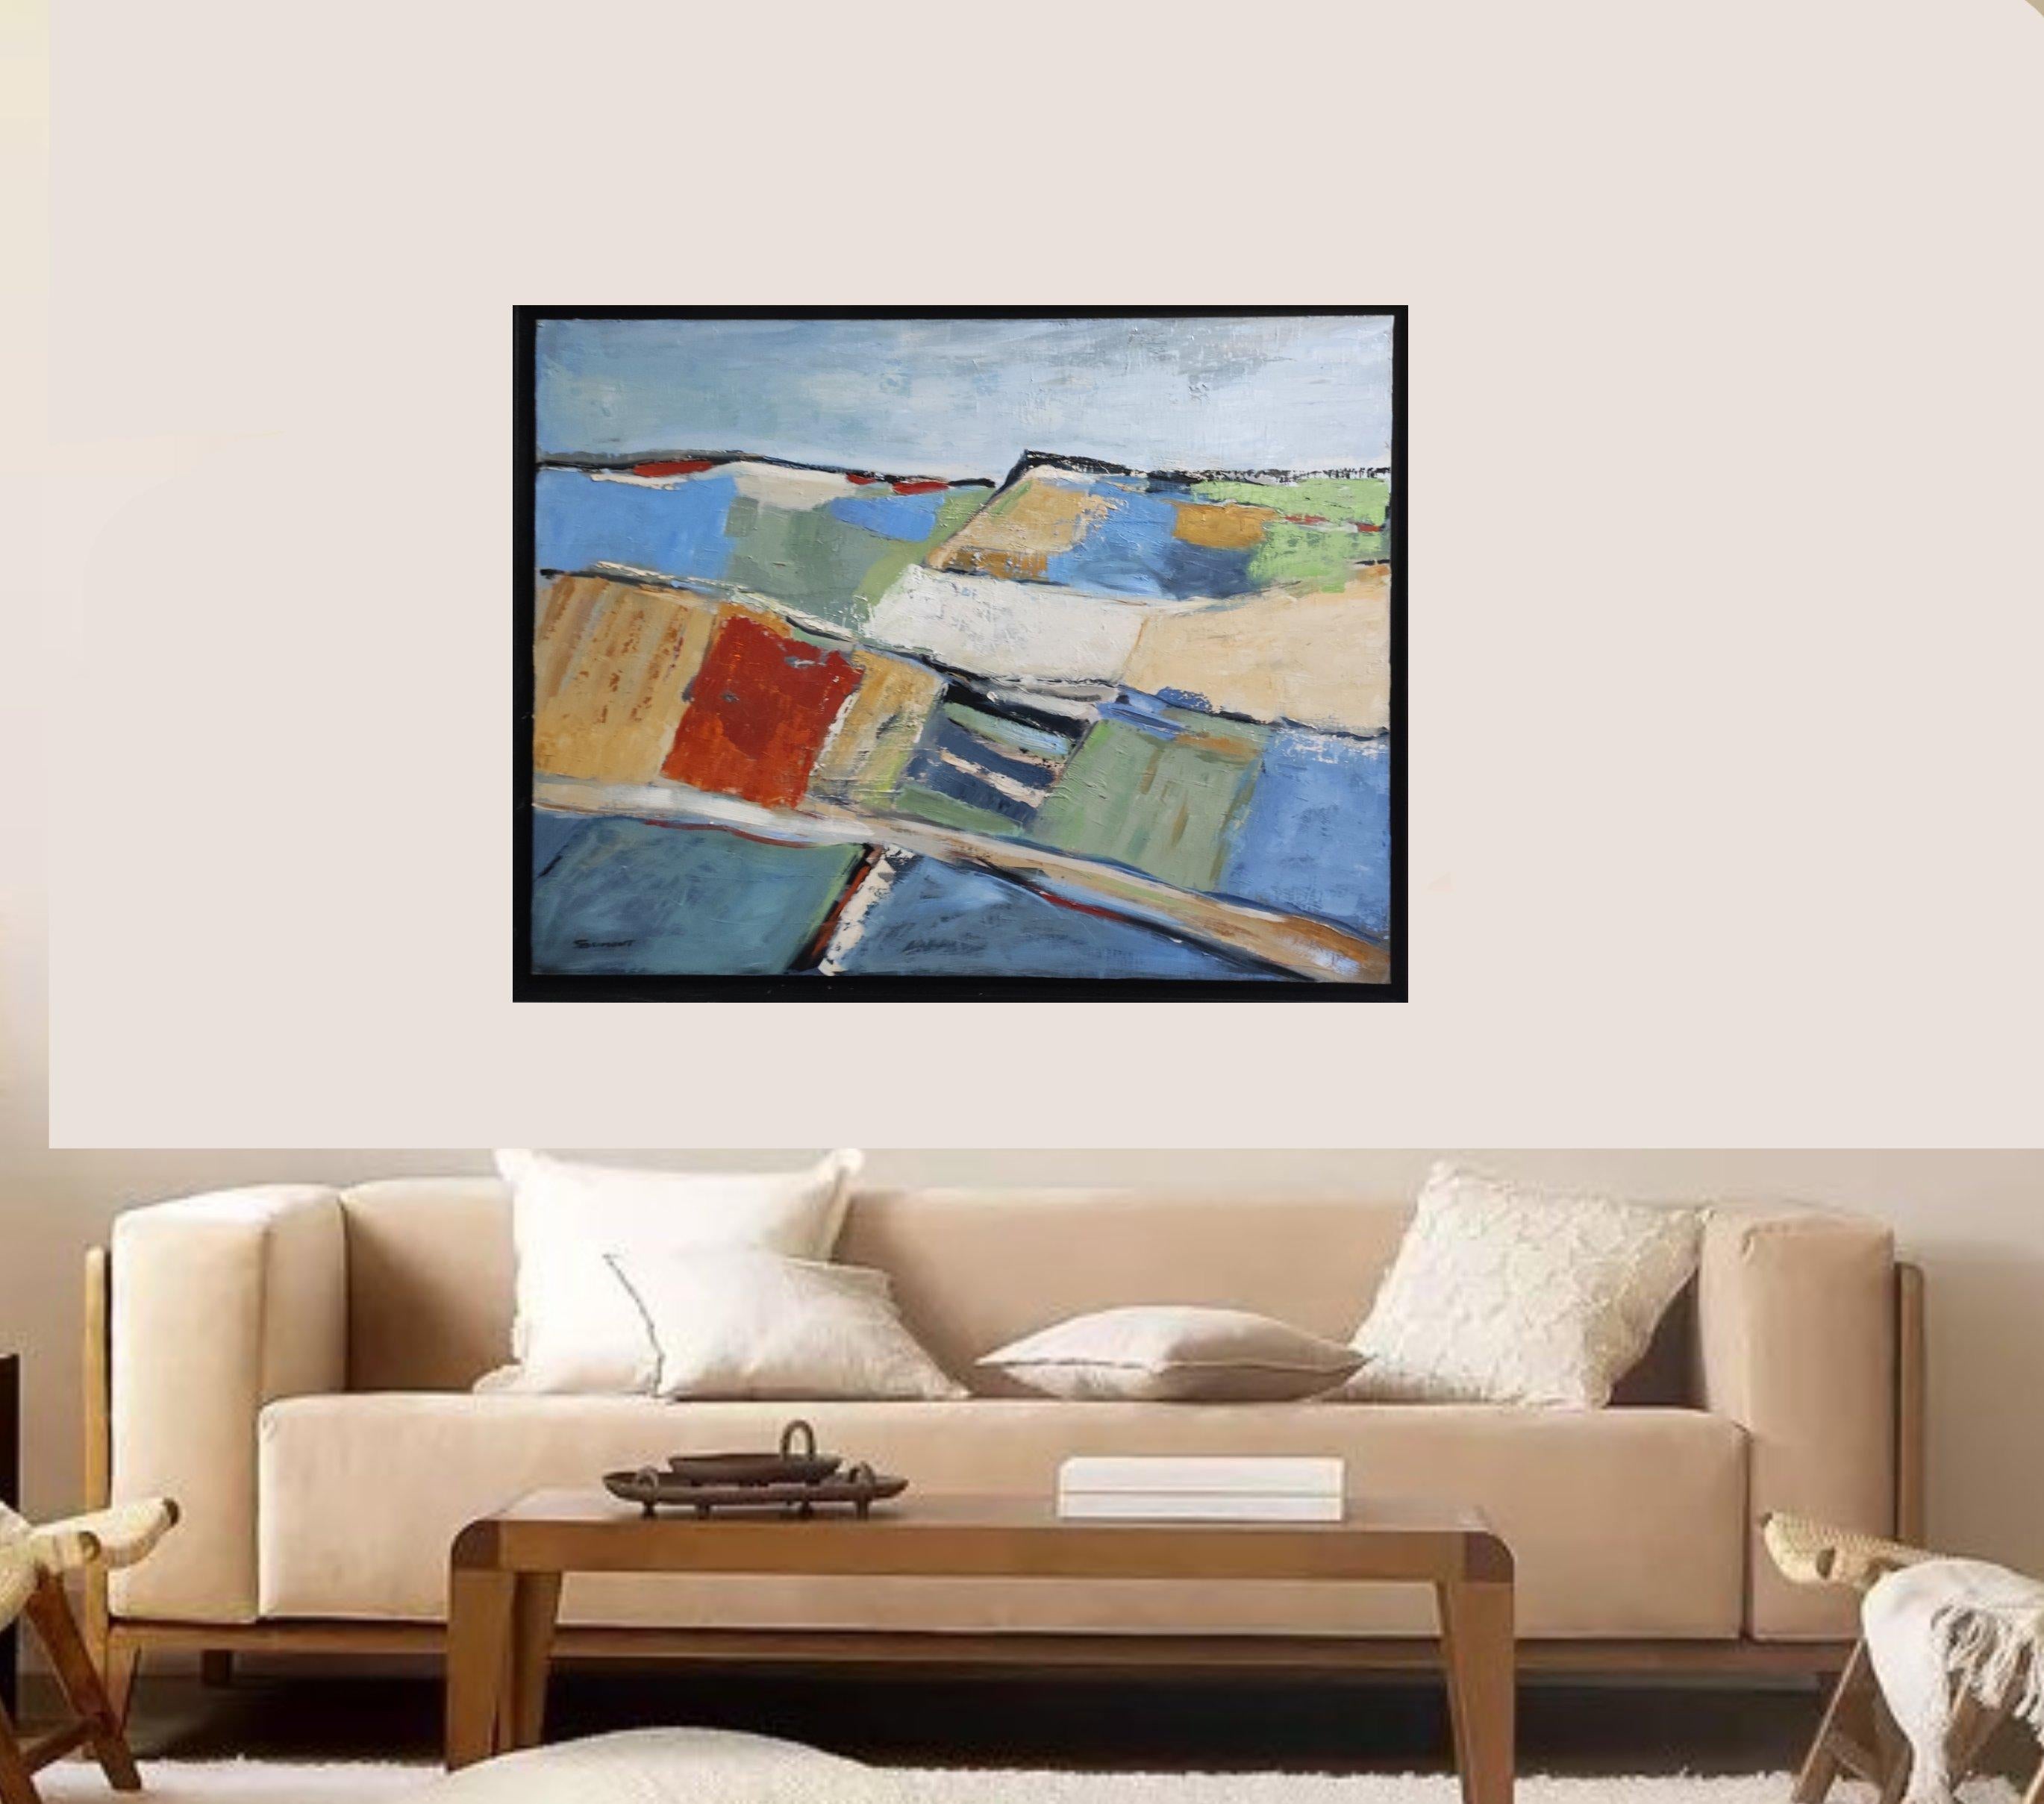 Abstract colorful landscape. Renowned artist Sophie Dumont explores the boundaries of abstract expressionism. The landscape evolves through modulations with softened contours, suggesting volumes more than delineating a precise motif. The palette,